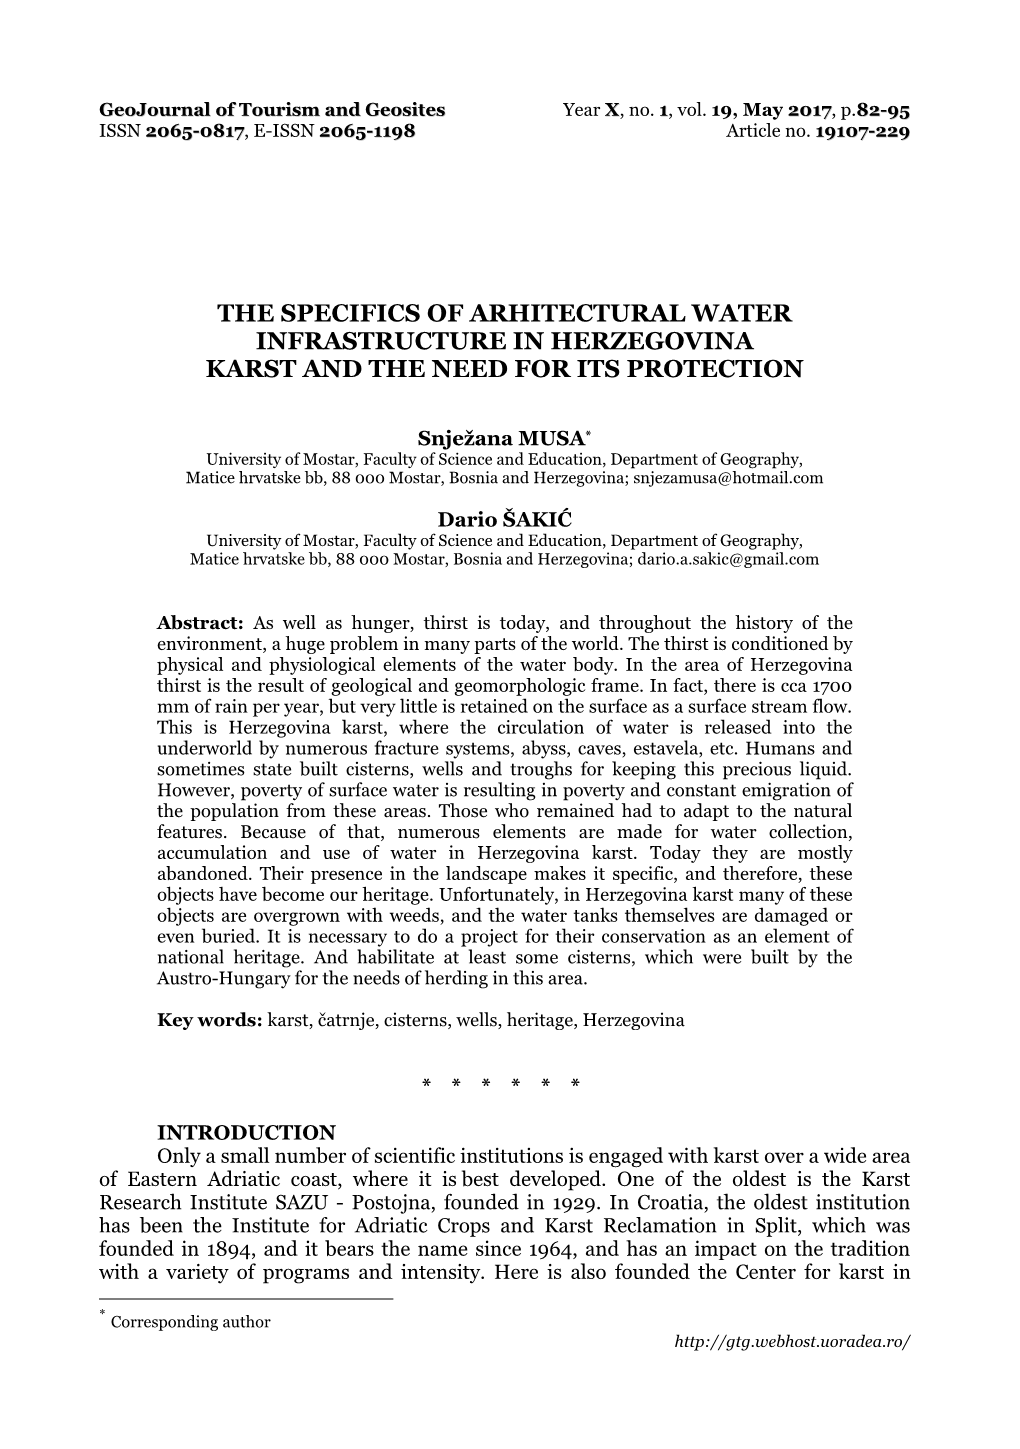 The Specifics of Arhitectural Water Infrastructure in Herzegovina Karst and the Need for Its Protection